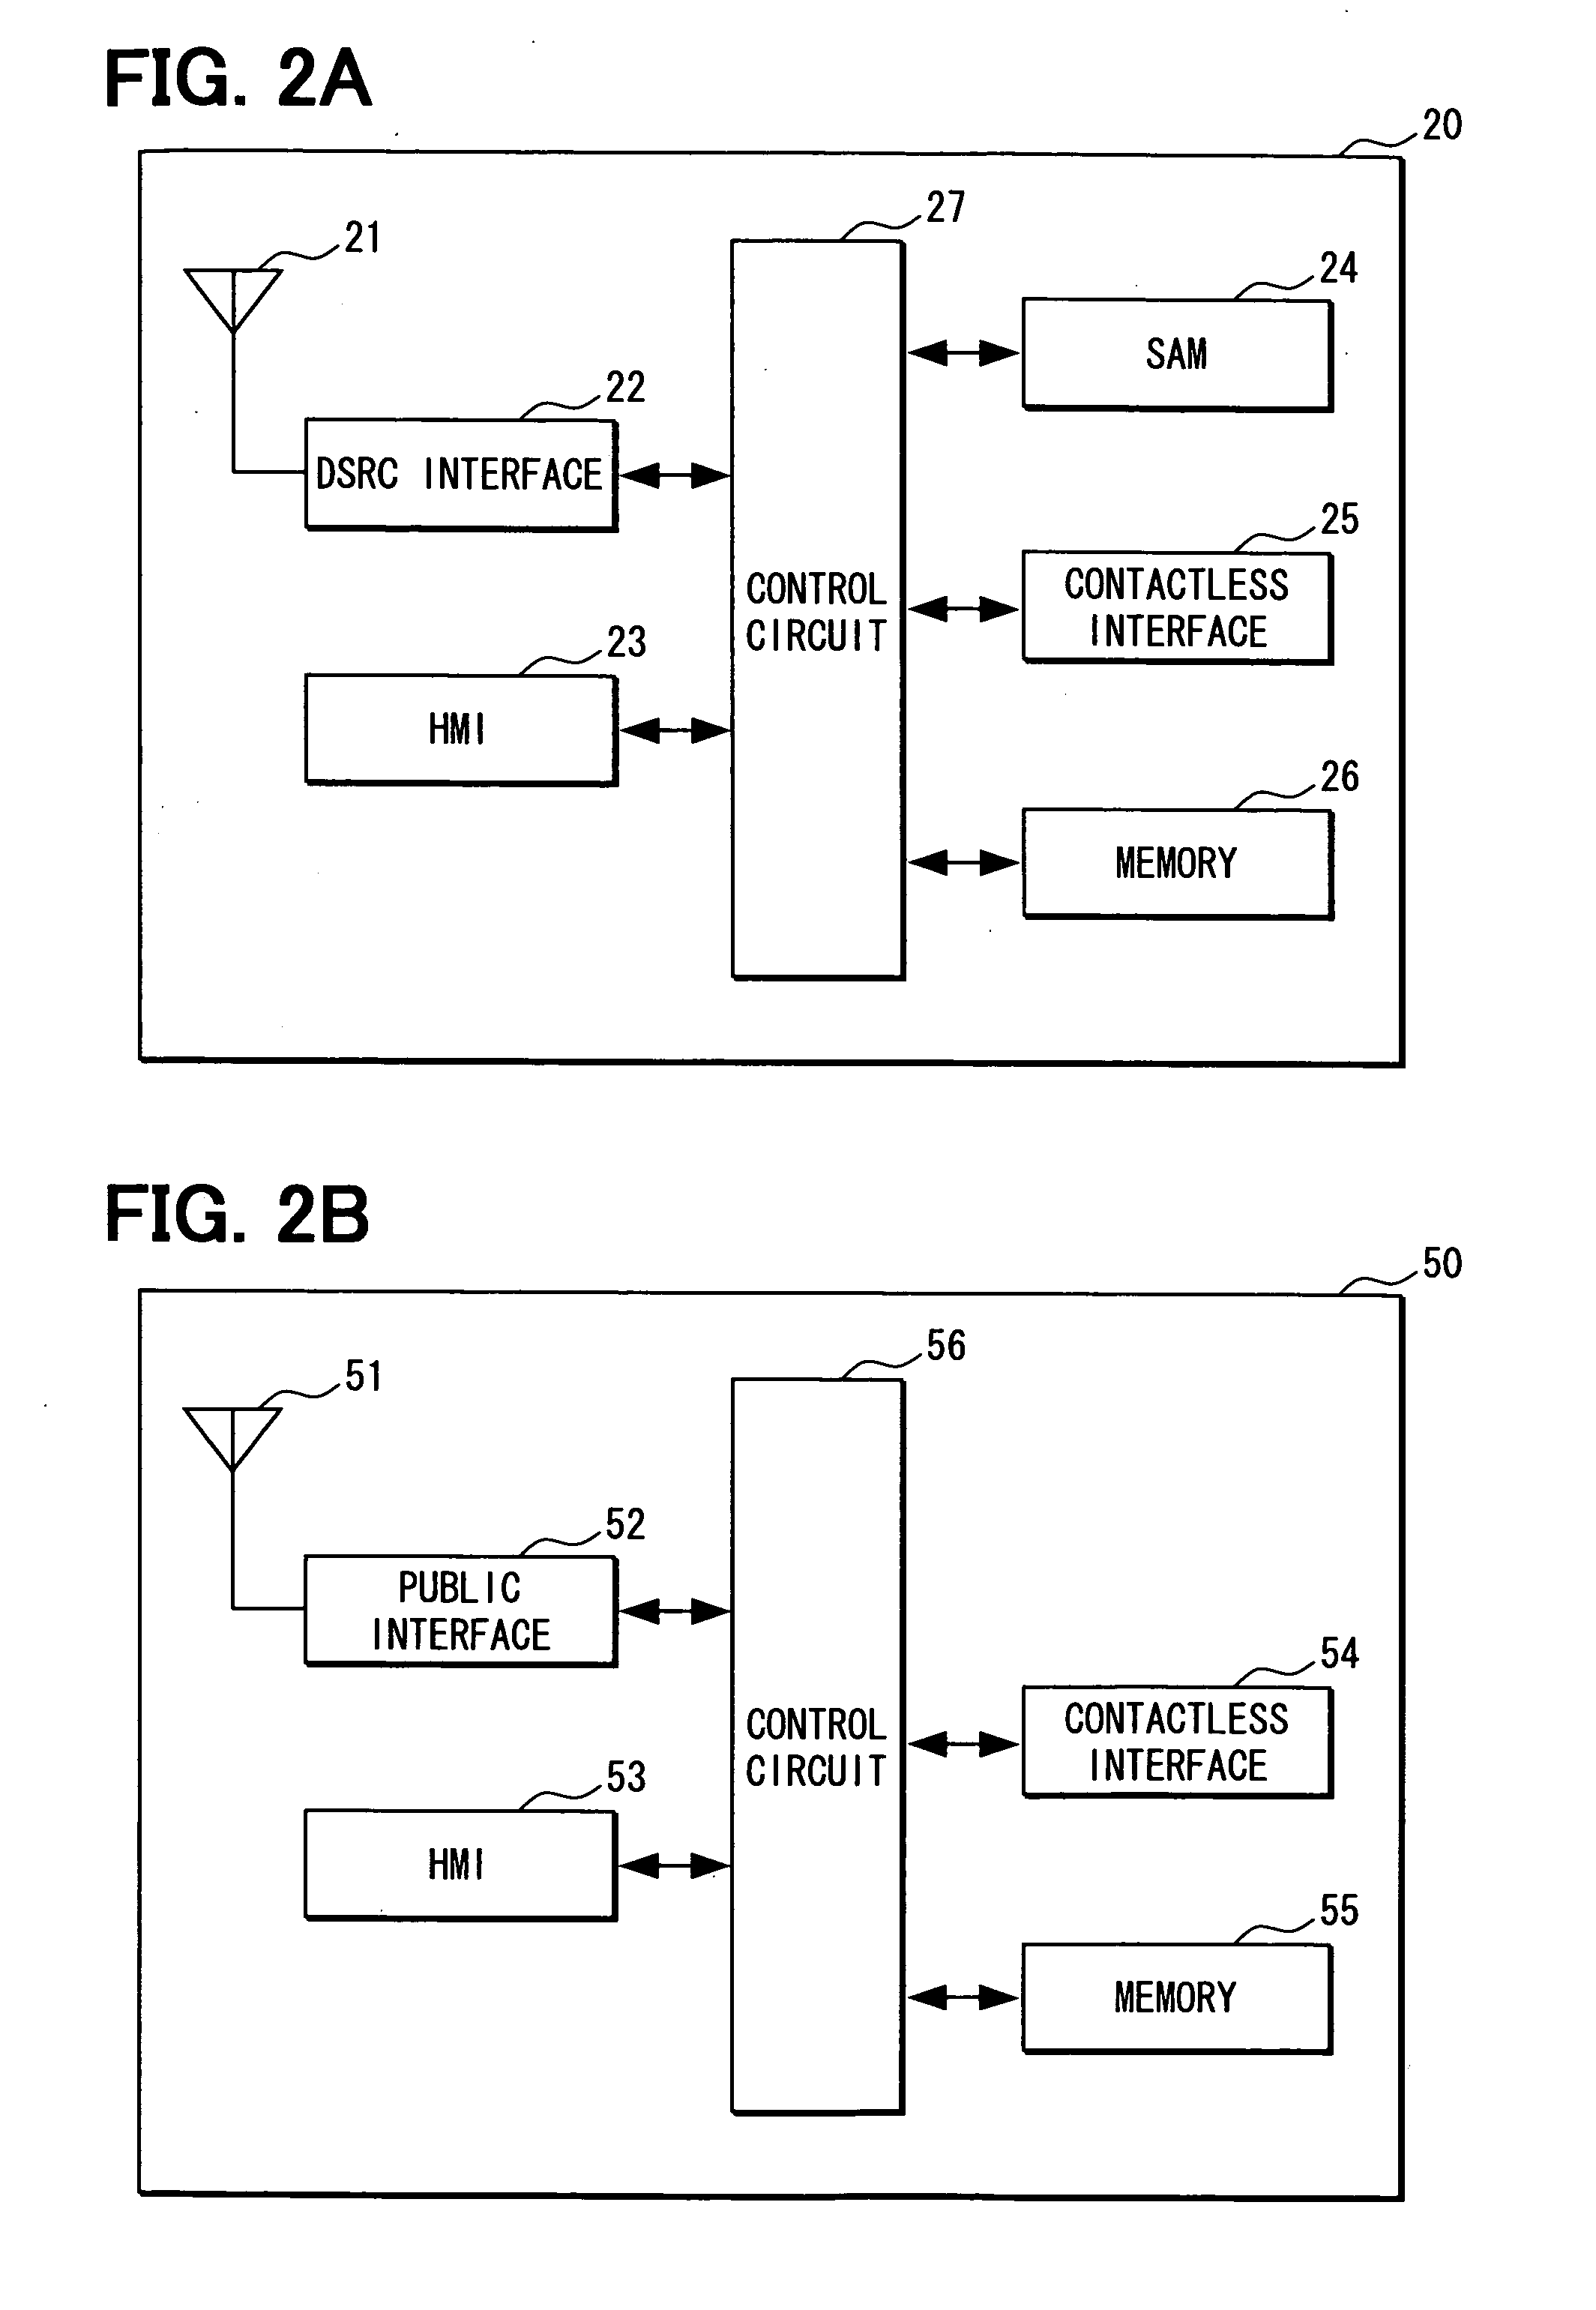 Electronic toll collection system, on-board unit, and terminal unit